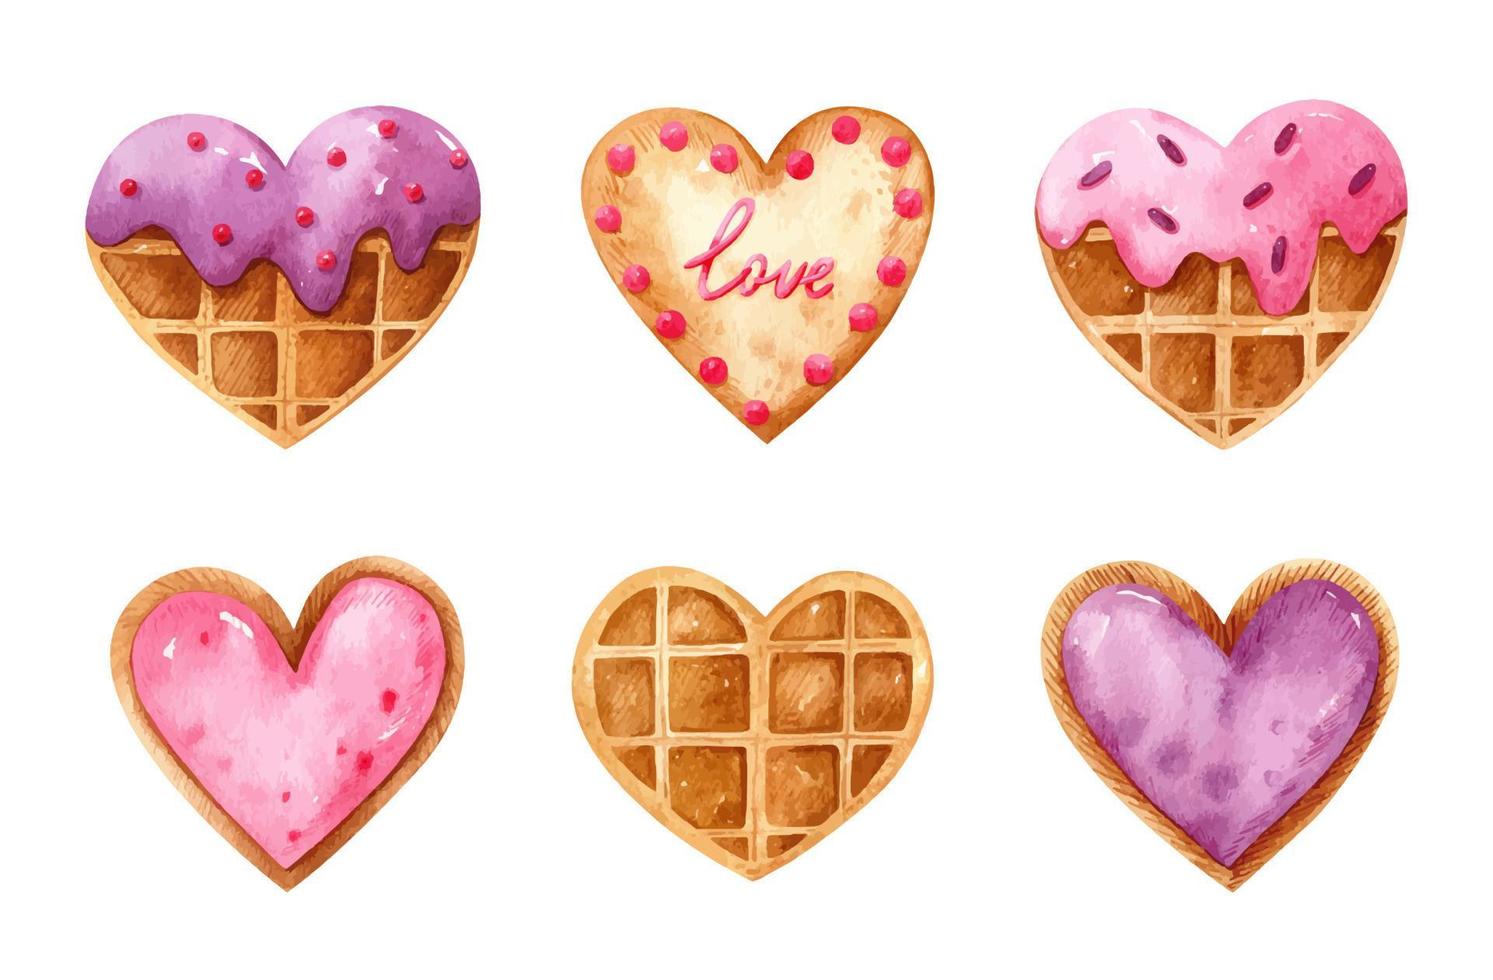 Valentine's day watercolor set with heart shaped desserts. Belgian waffles with glaze and sprinkles and without toppings, cookies with berry filling and festive decor. Perfect for cards, prints, menu. vector